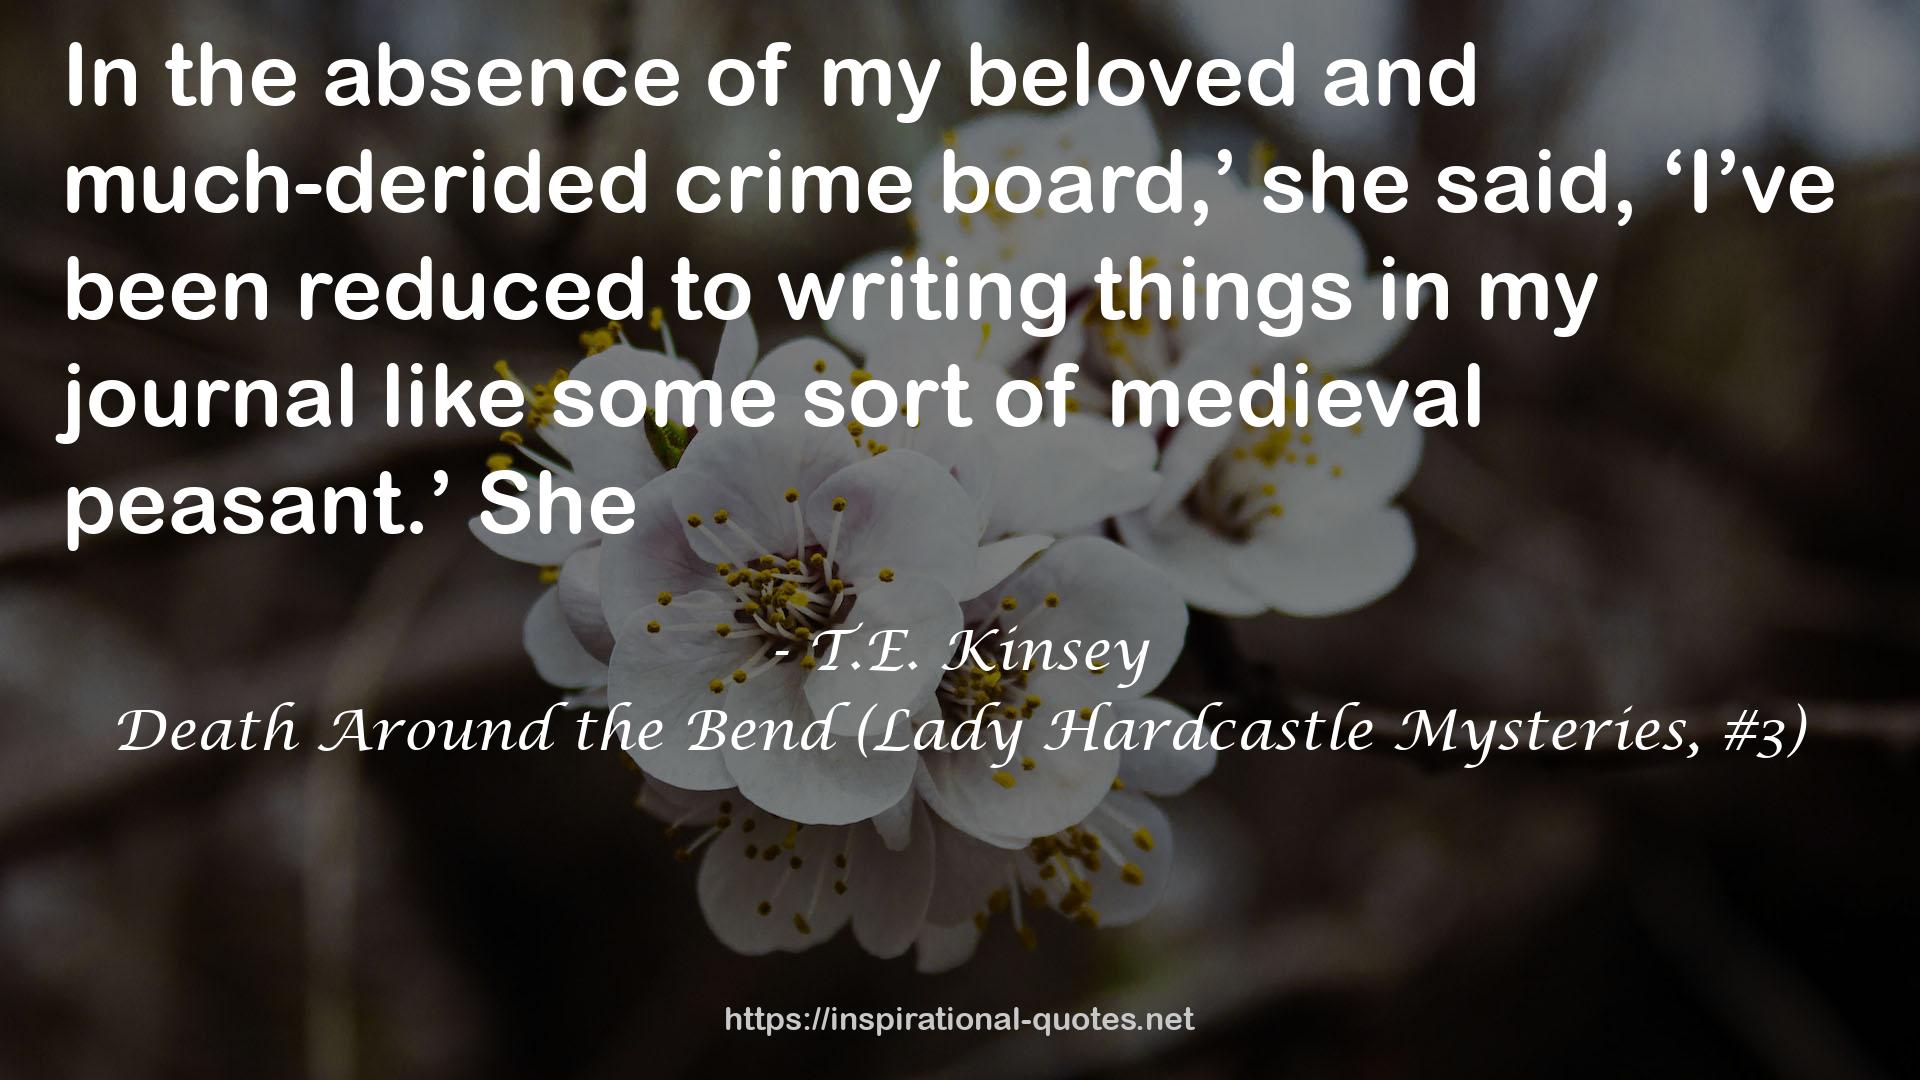 Death Around the Bend (Lady Hardcastle Mysteries, #3) QUOTES